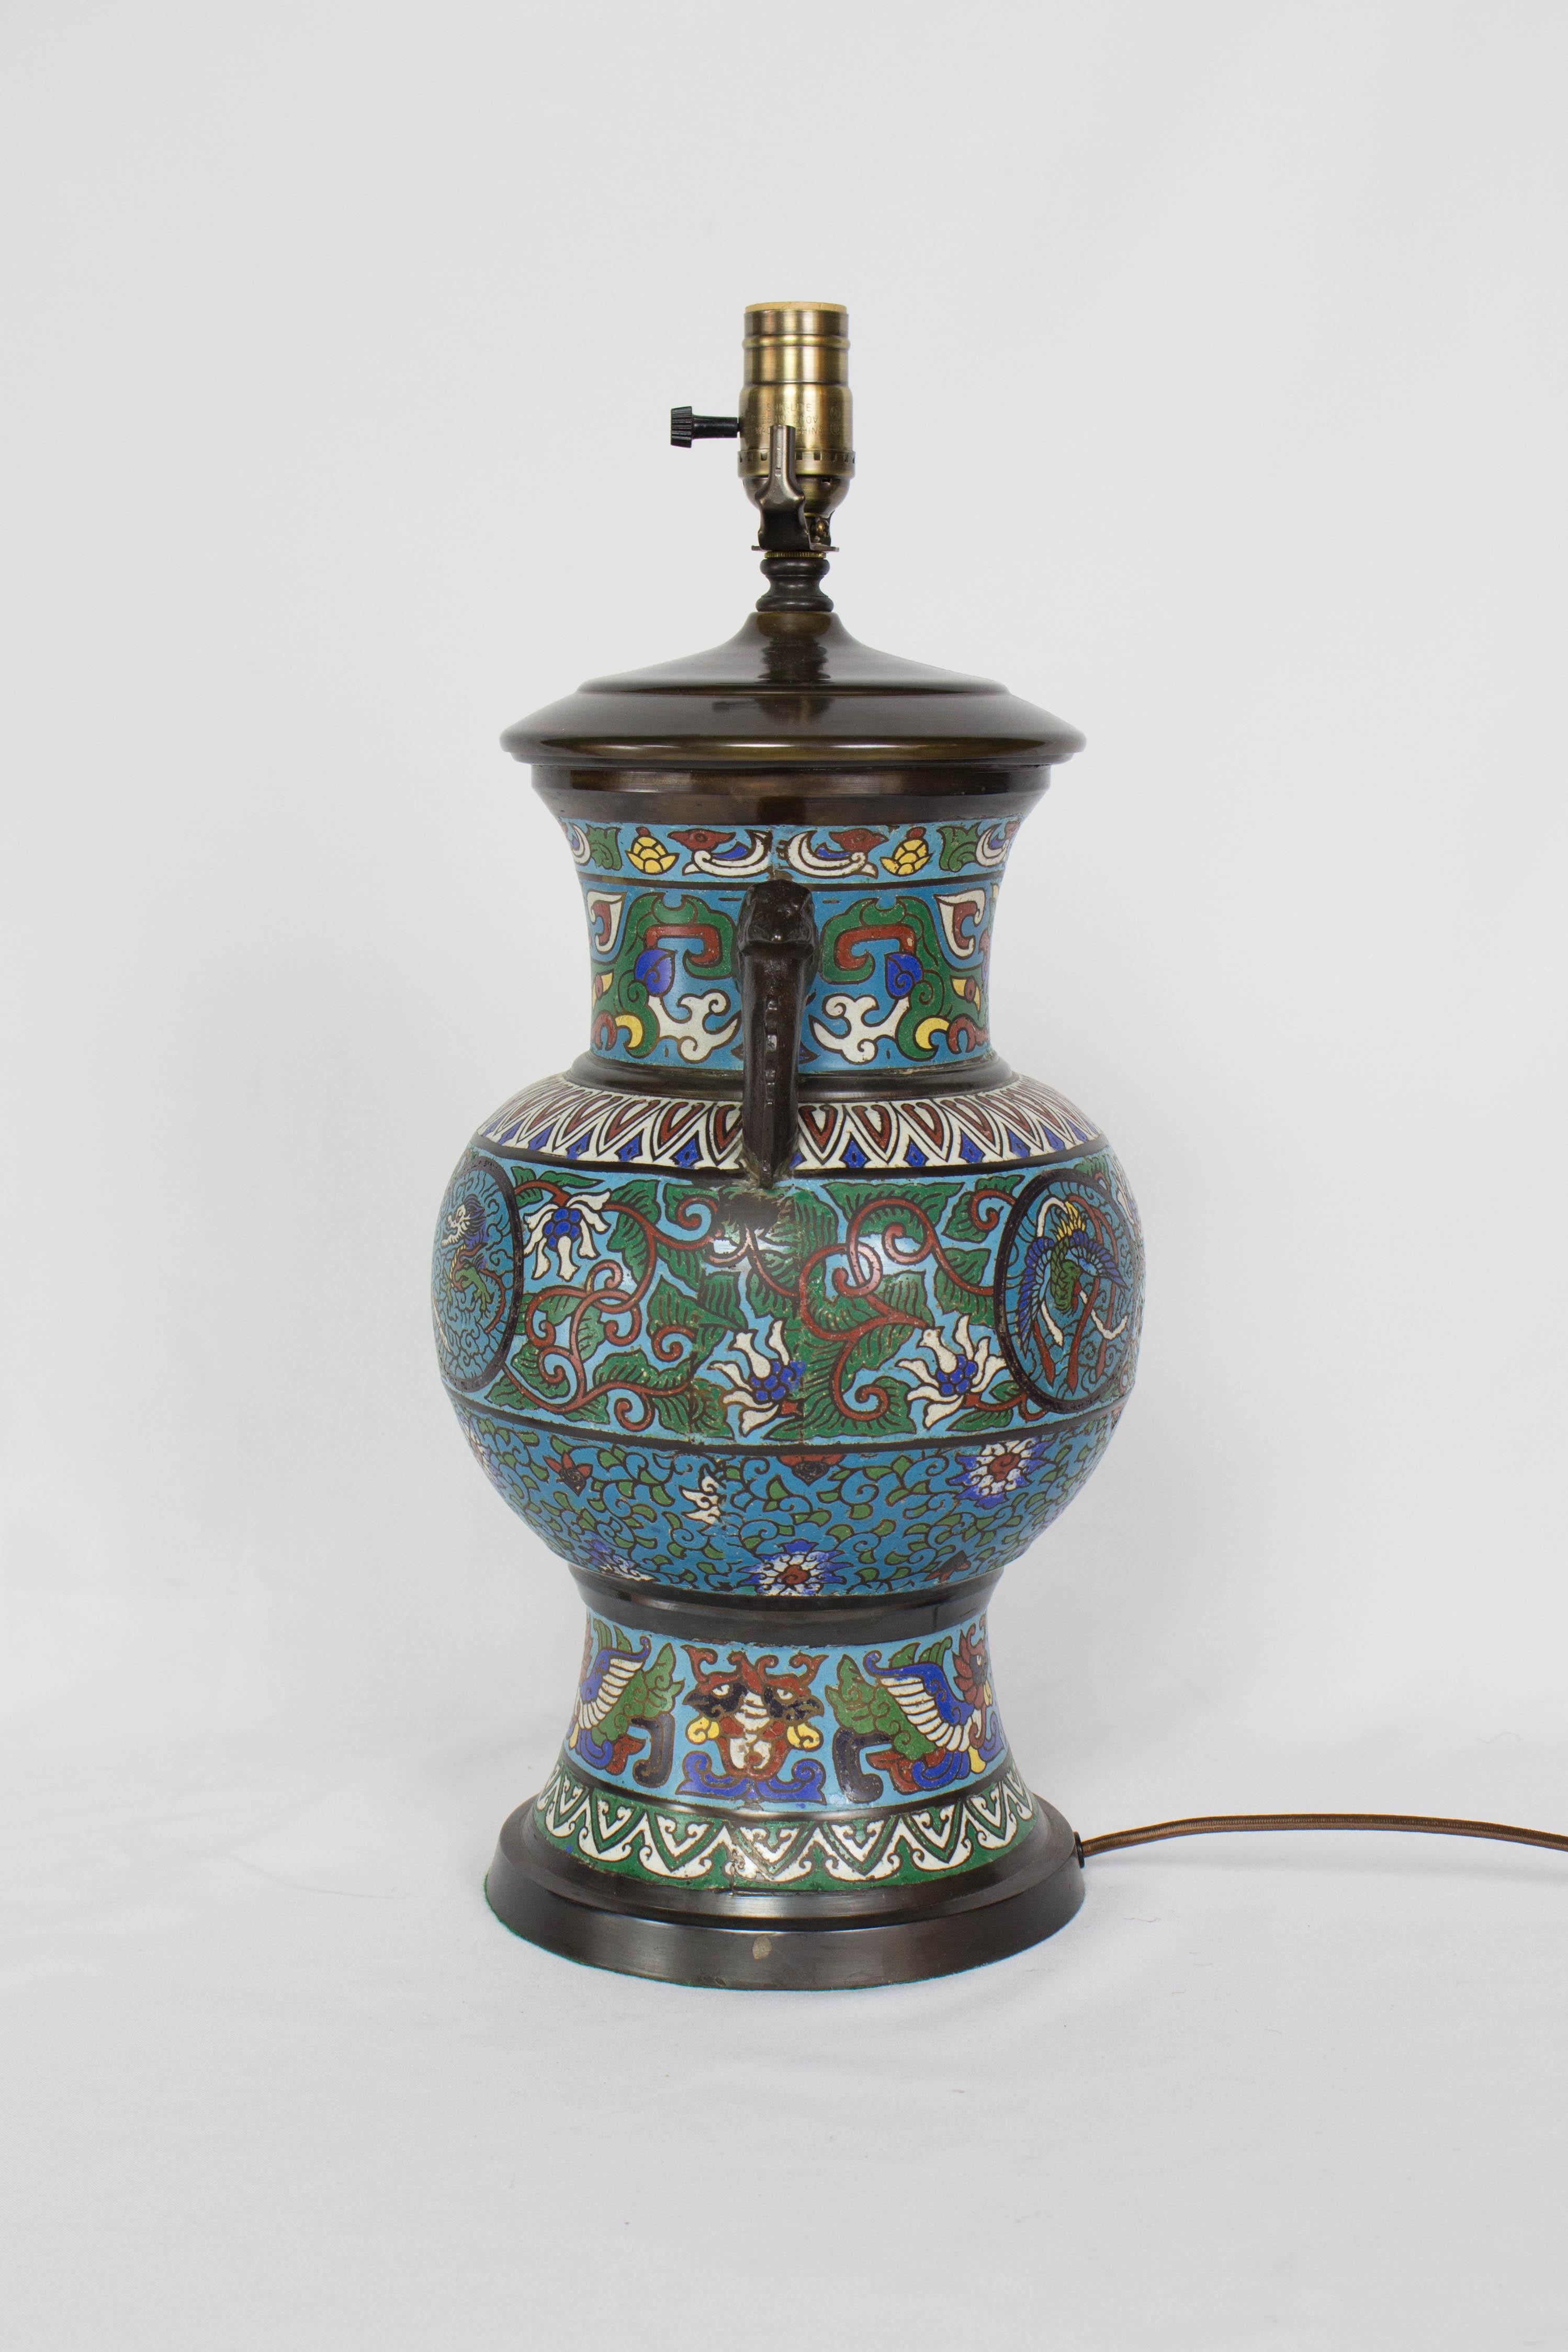 Champleve table lamp with Dragon Design, Two Handles. brightly saturated blues and reds.